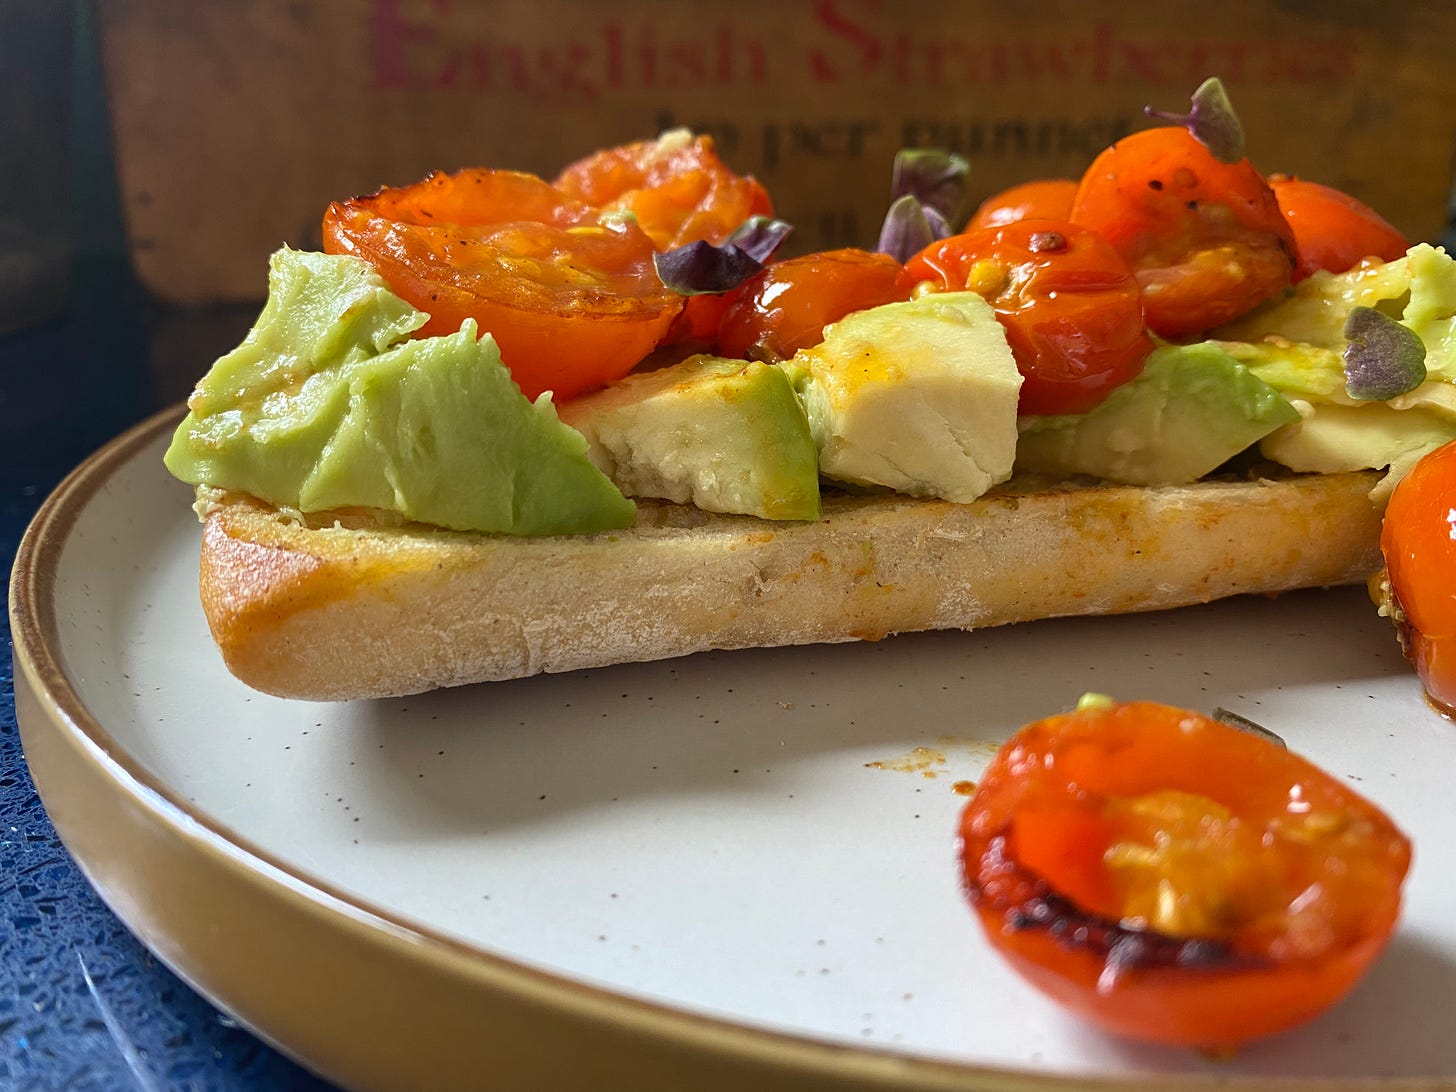 Piece of toasted bread with chopped avocado and cooked, halved tomatoes